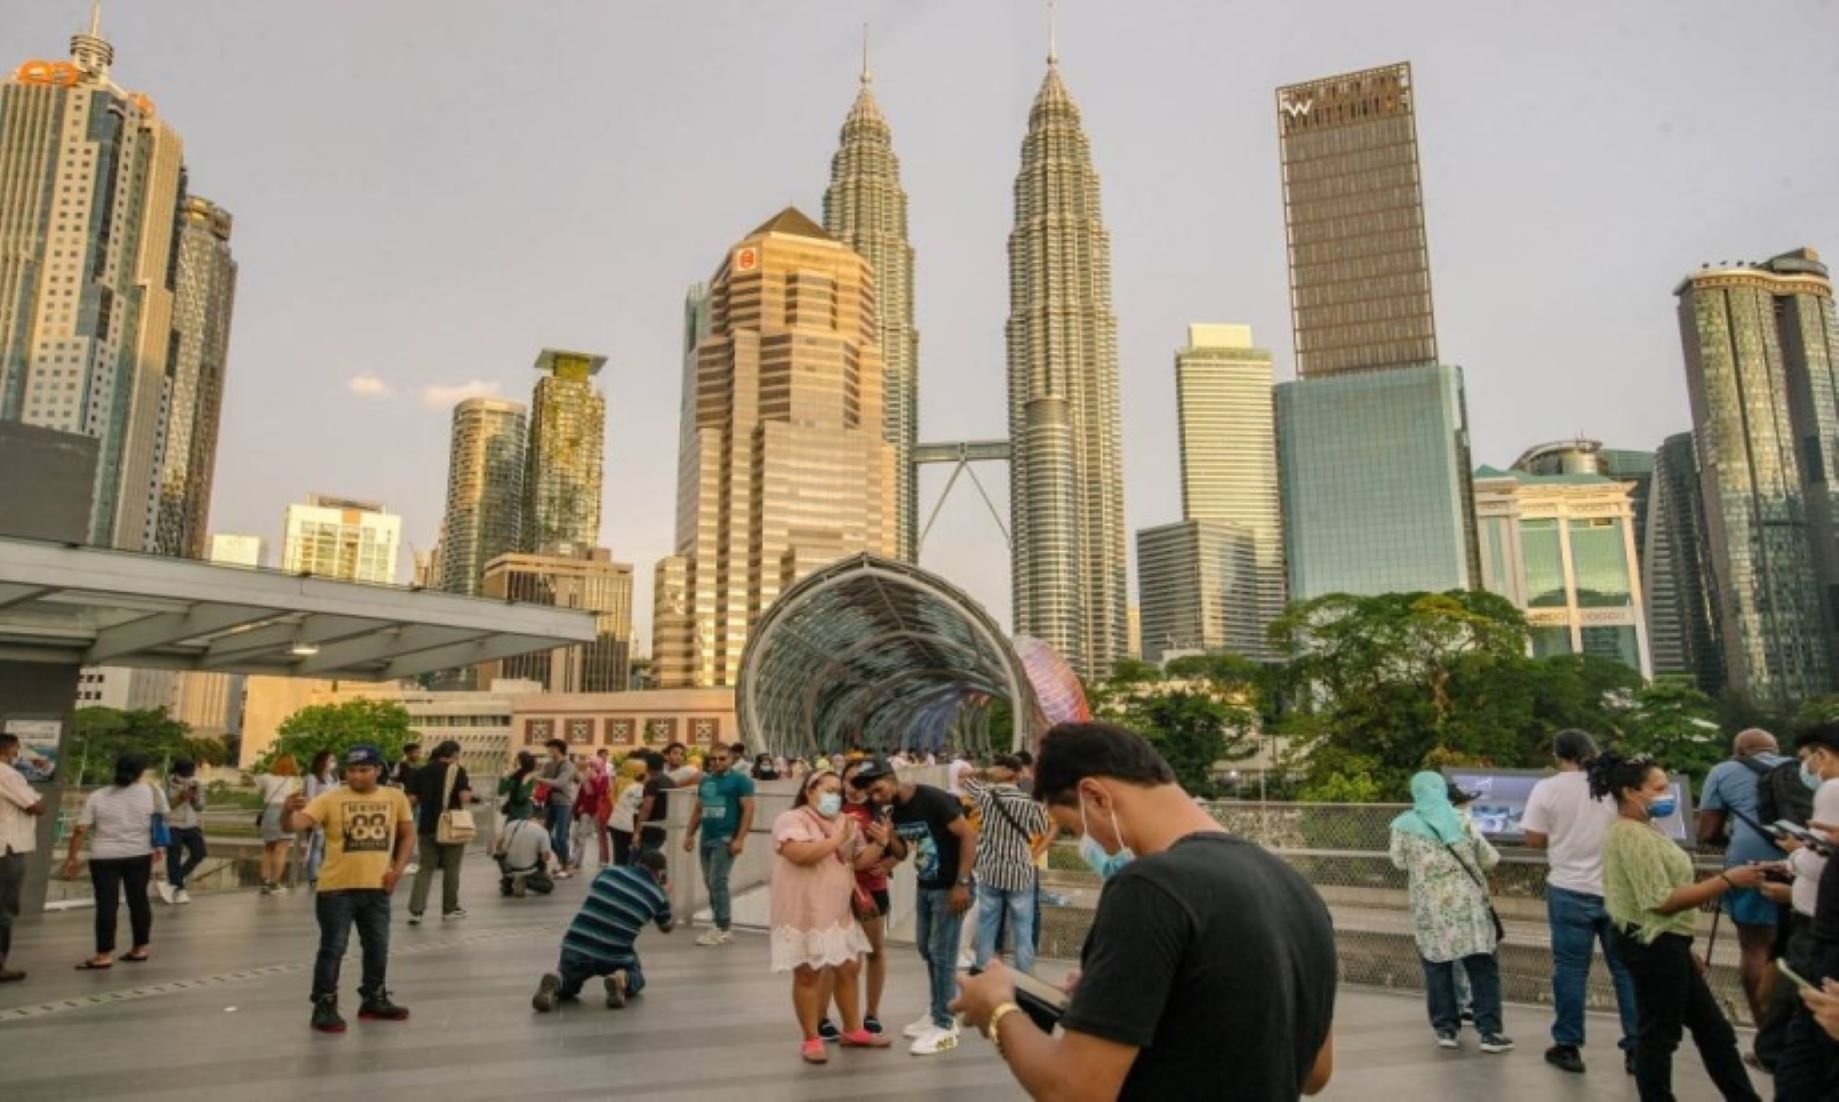 Malaysia’s Population Reached 33 Million In Q4 2022